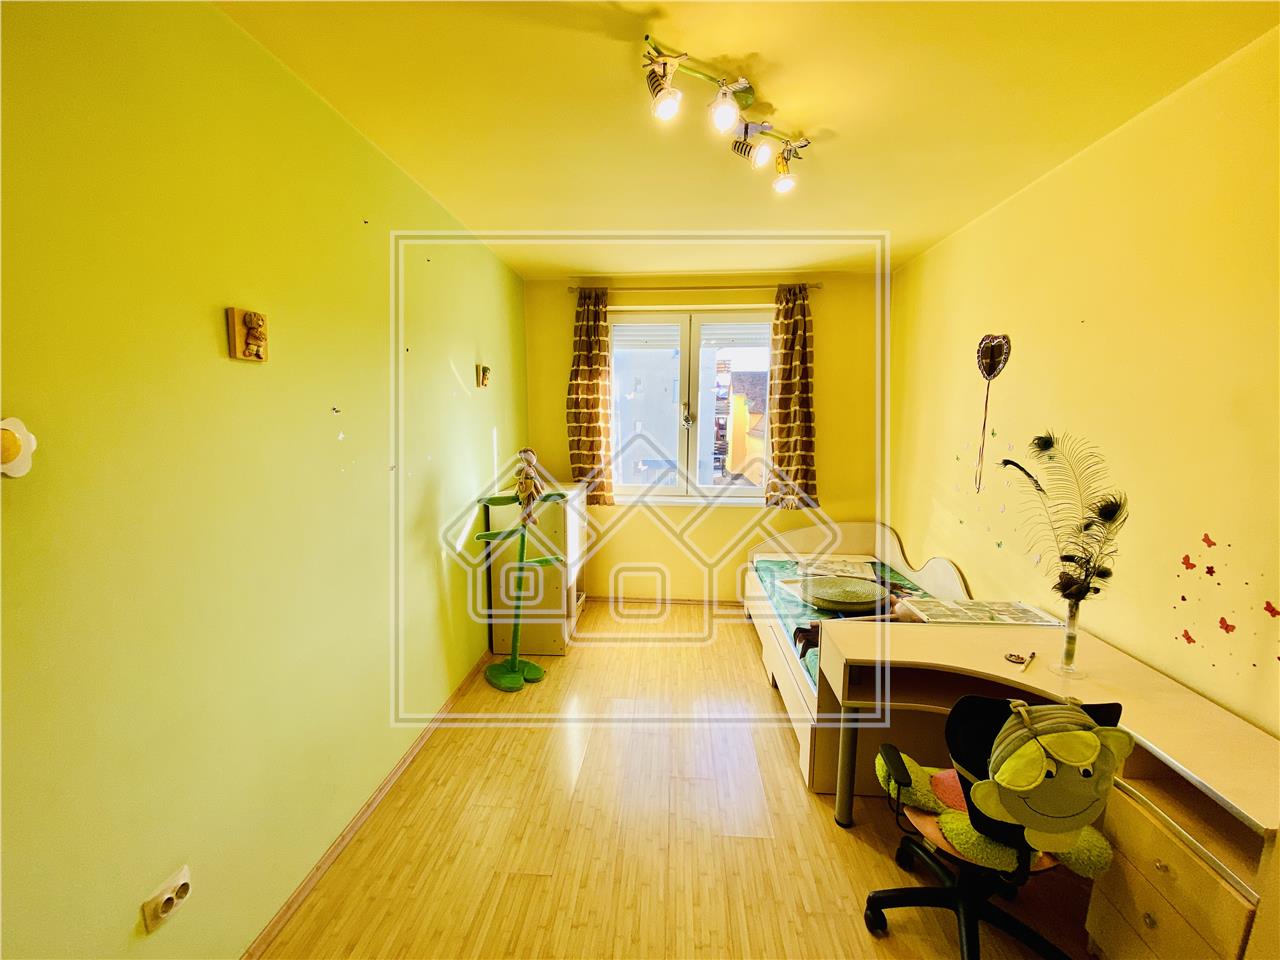 Apartment for sale in Sibiu - 3 rooms and 2 balconies - 85 square mete